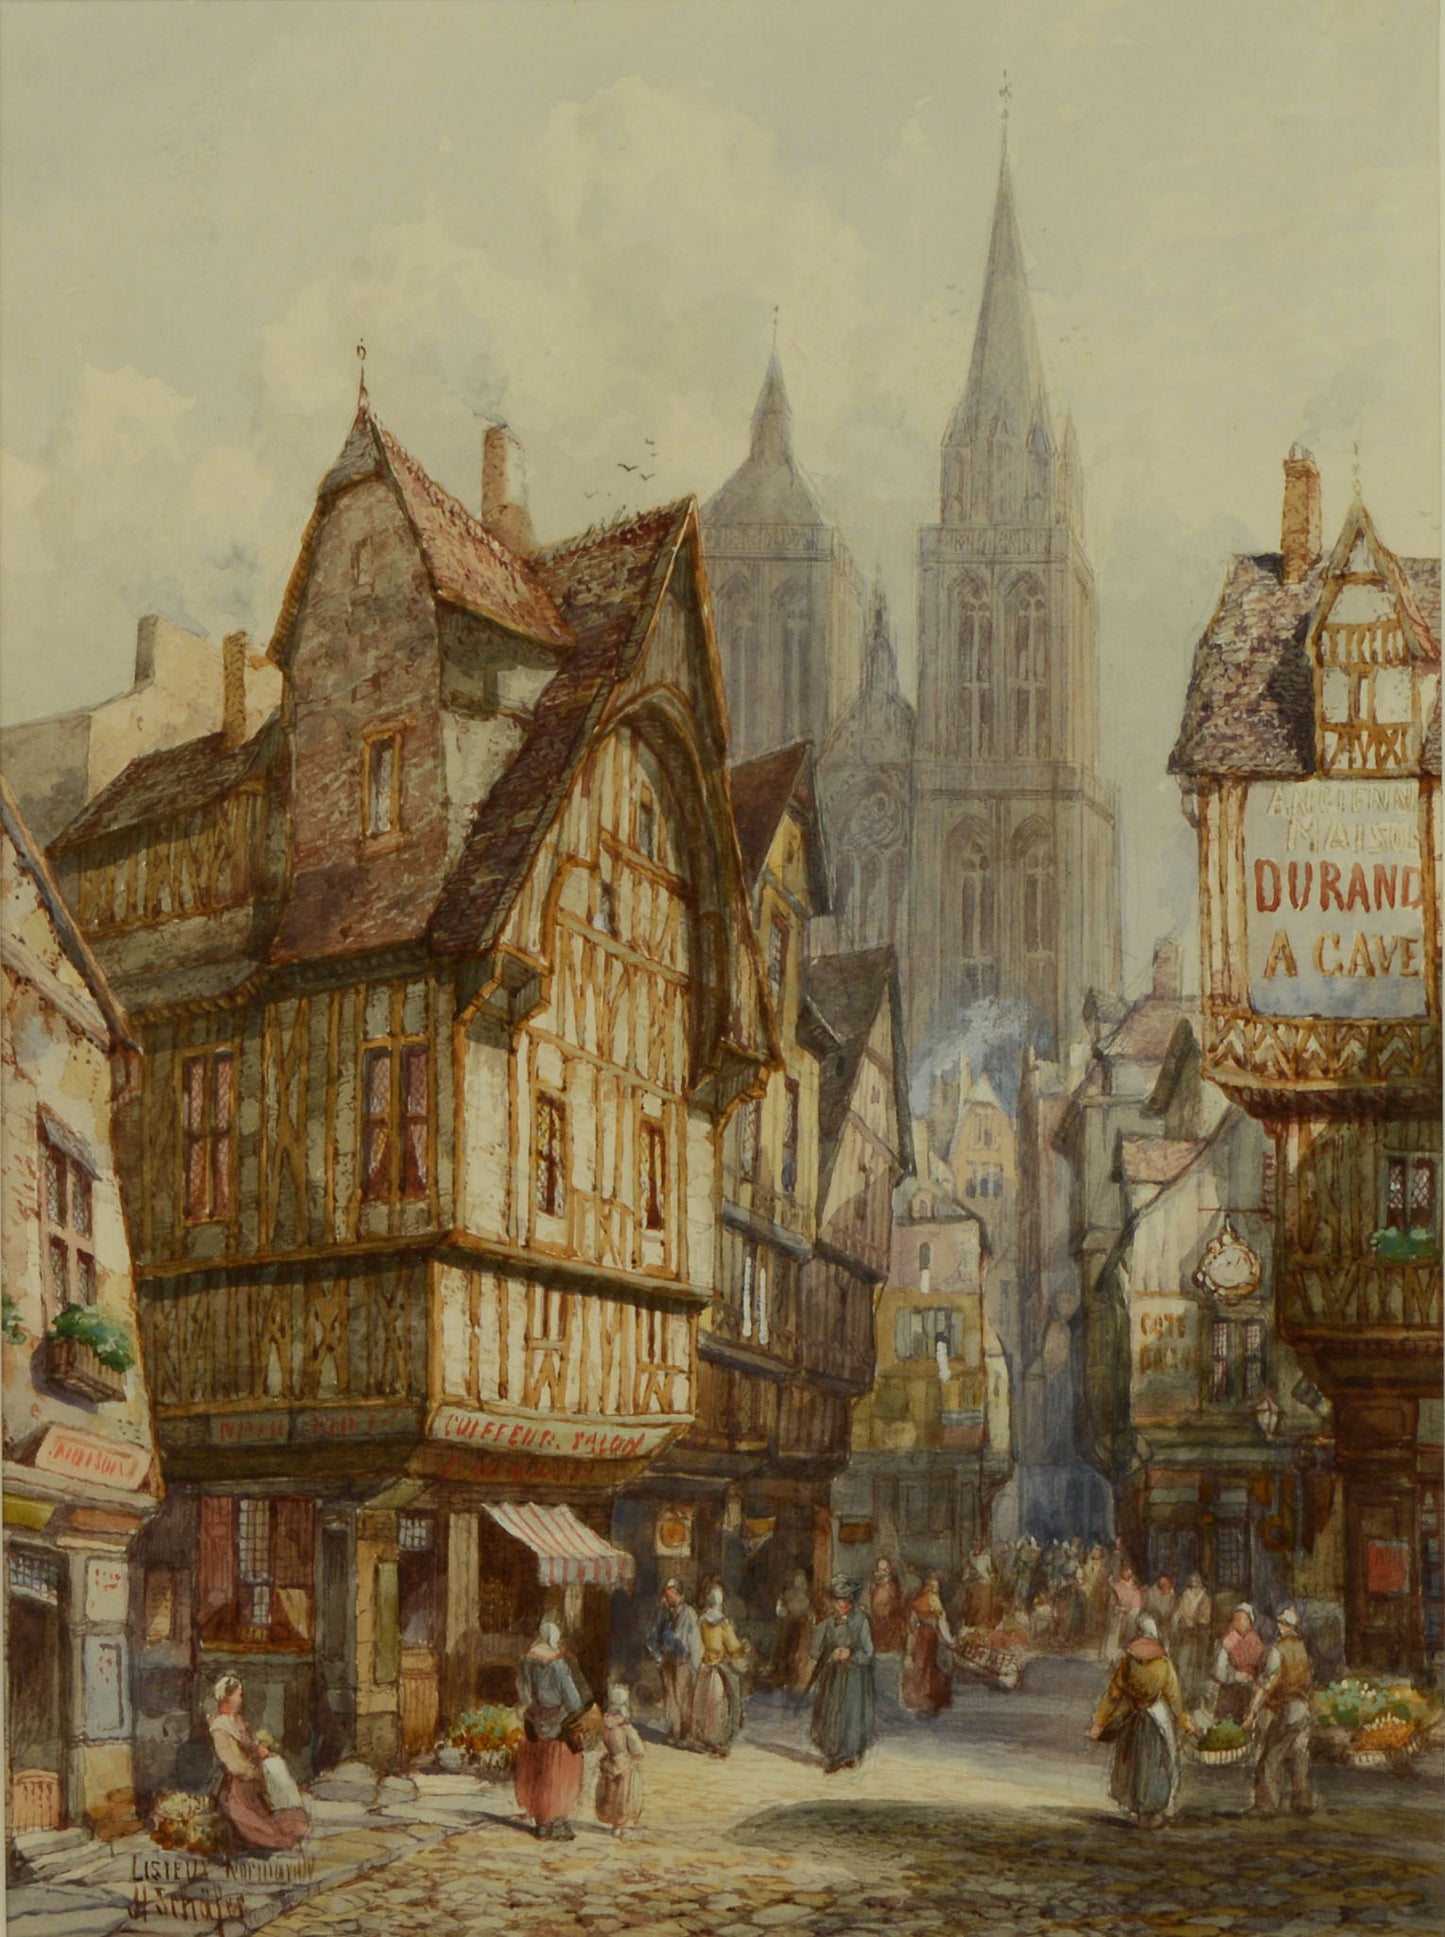 Lisieux, Normandy - watercolour by Henry Schafer